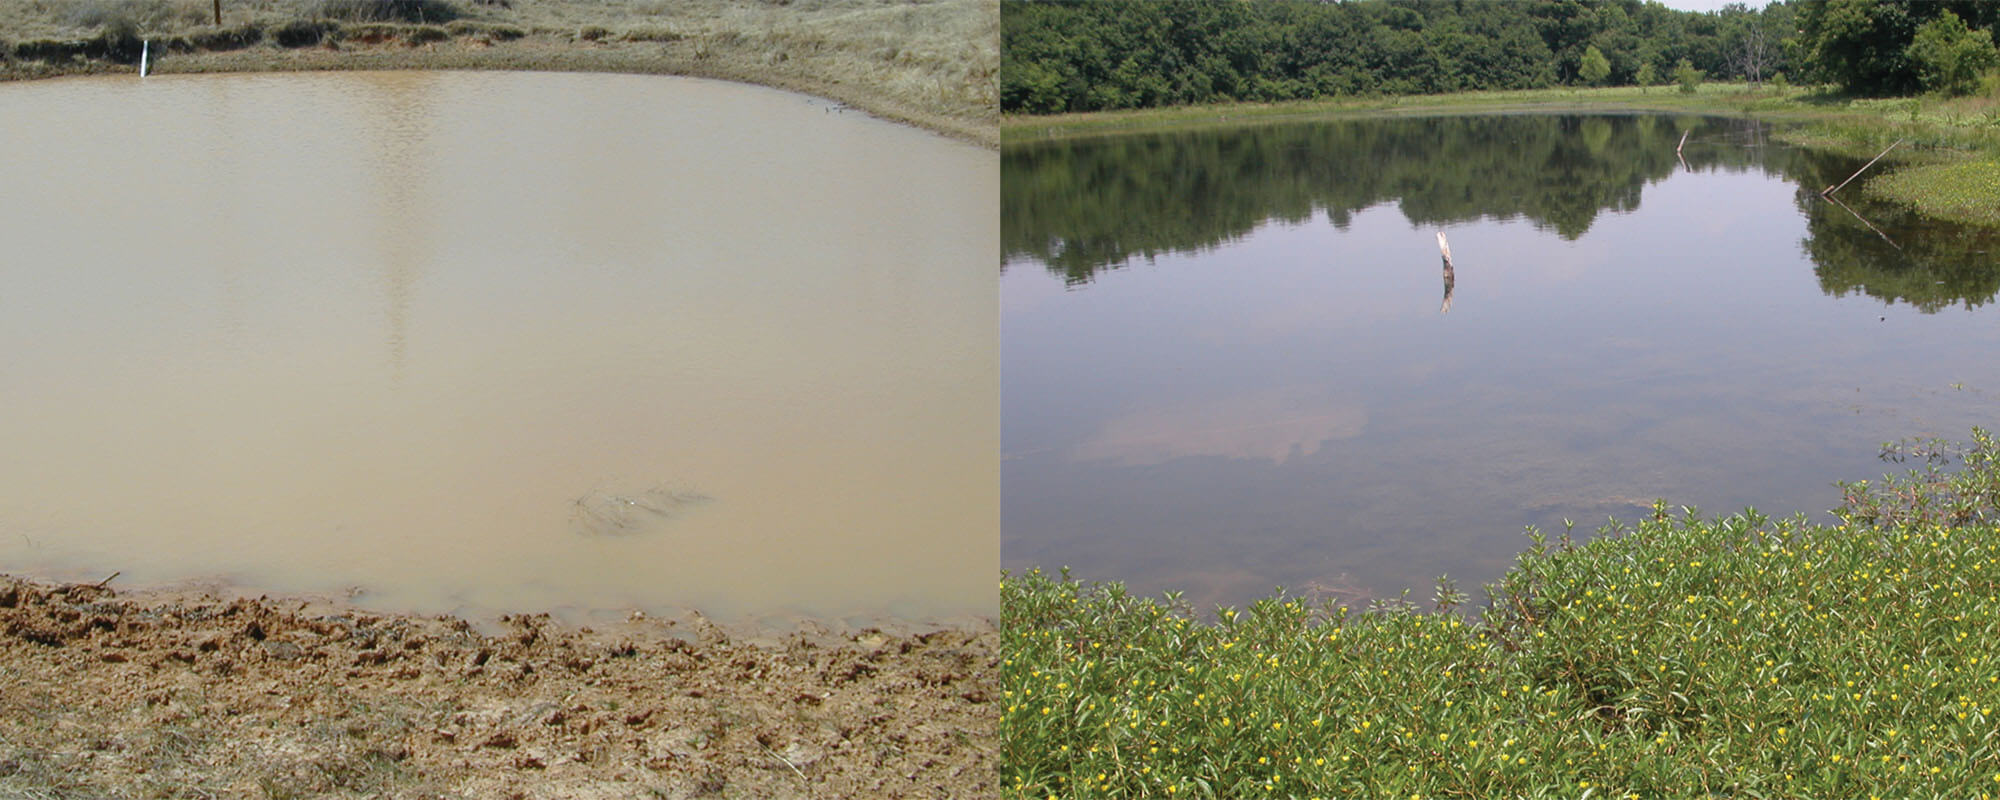 Two different ponds showing contrasting water quality, murky dirty water on the left, and clean clear water on the right